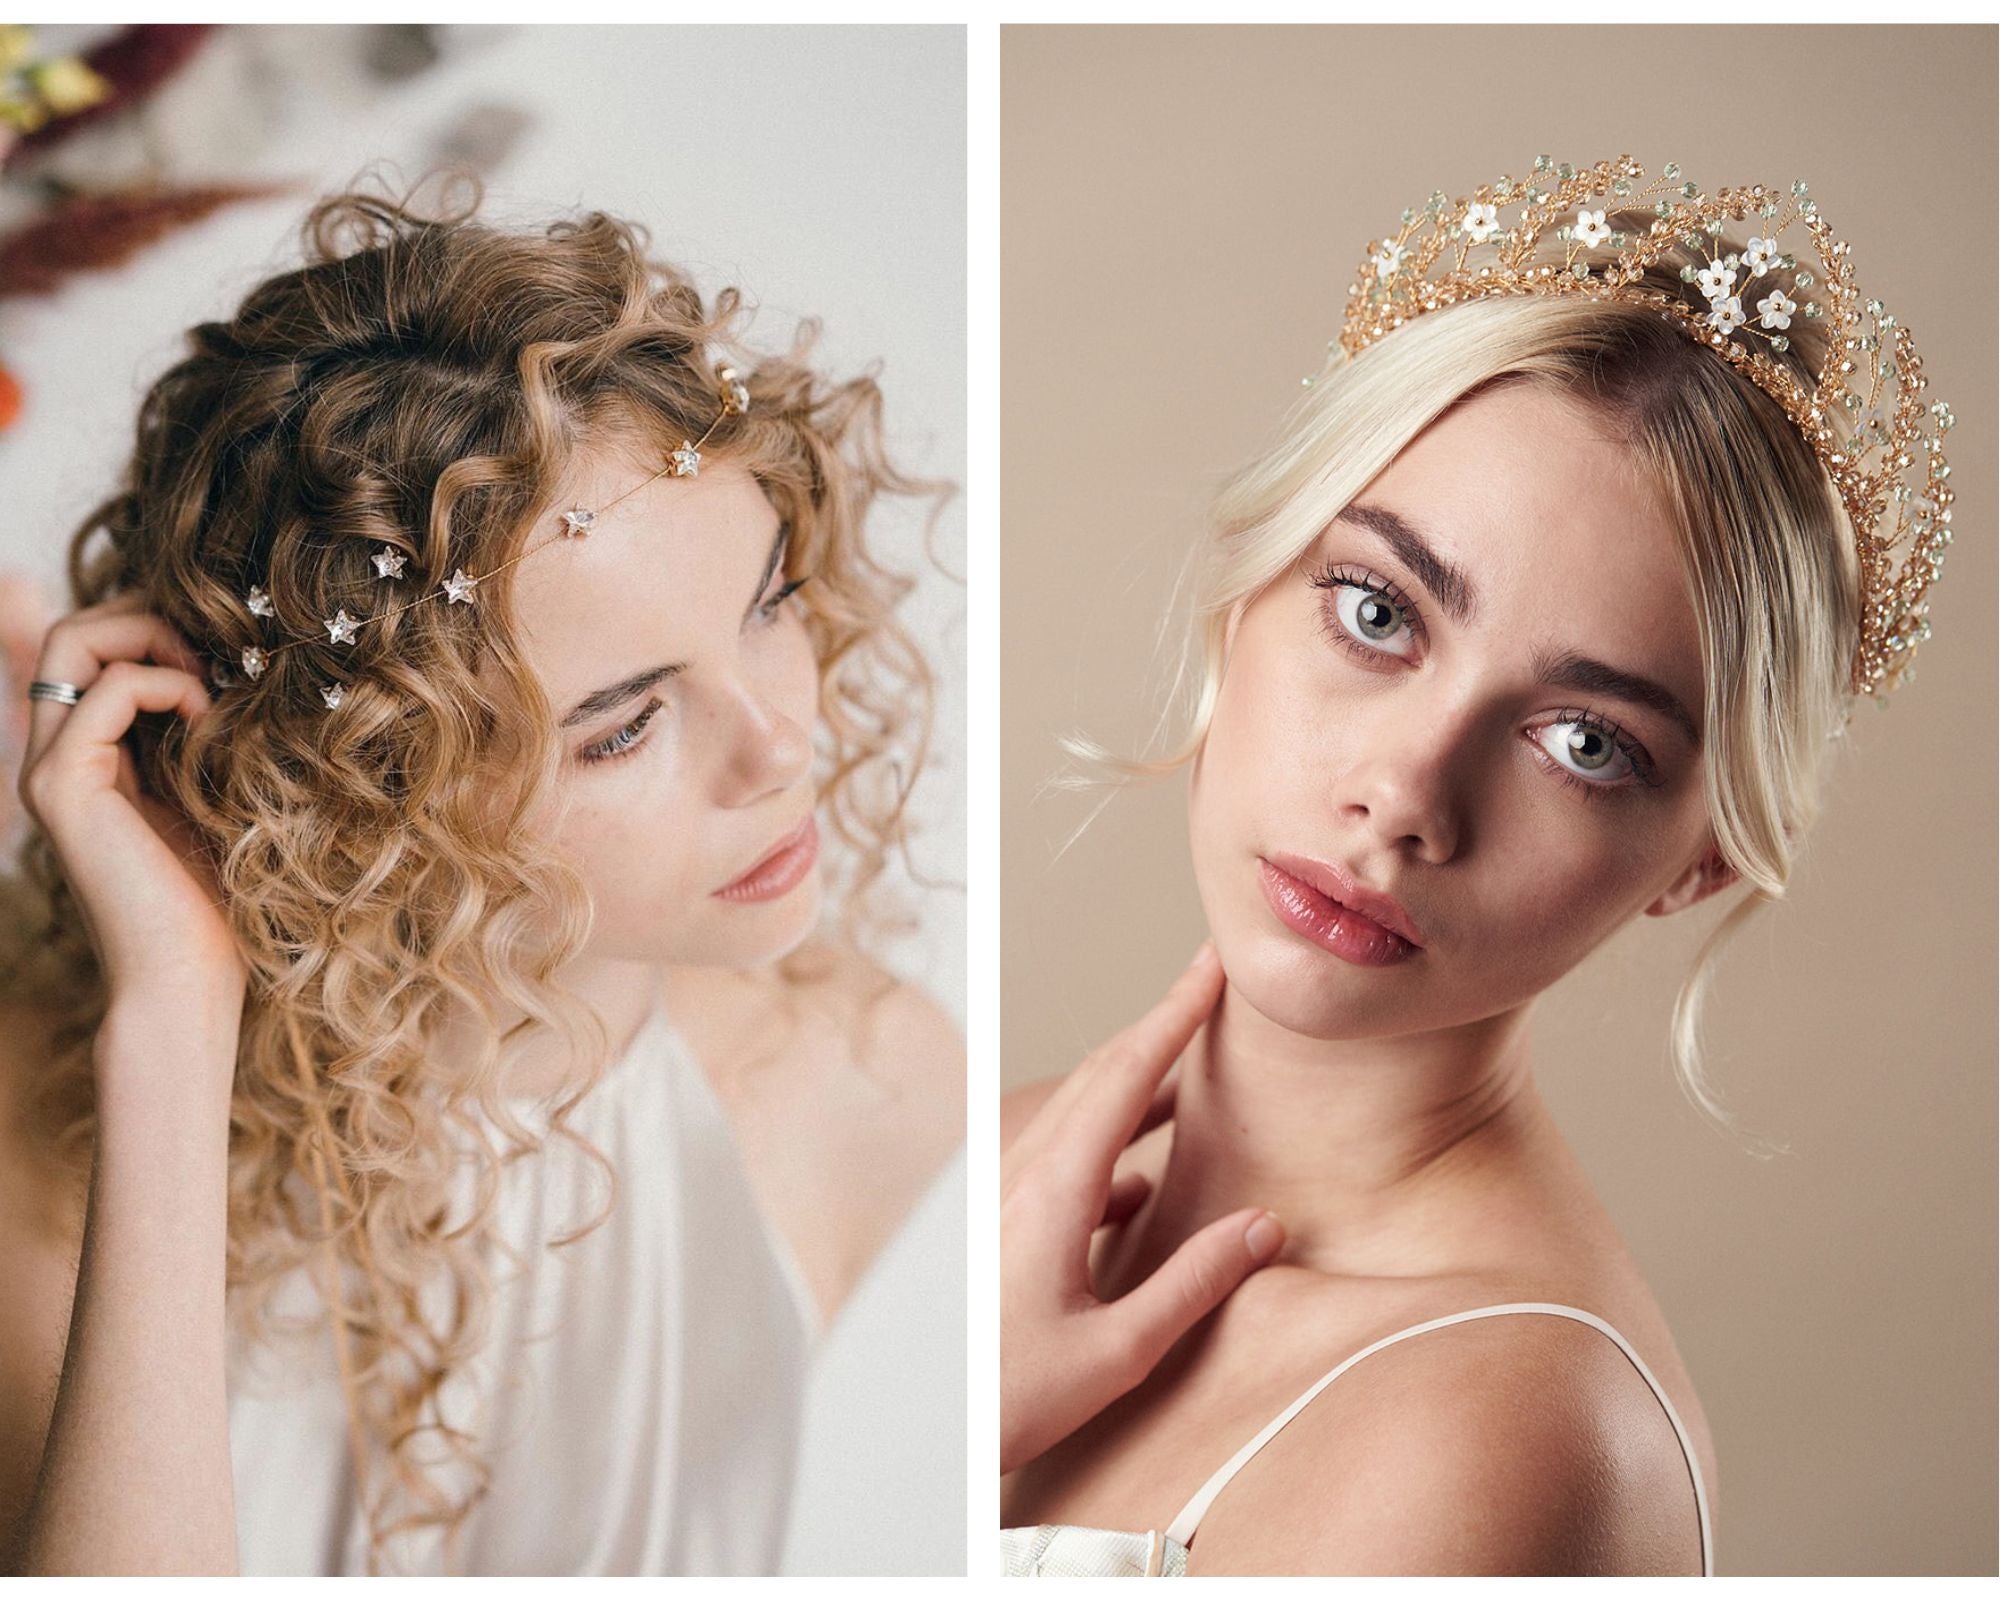 Bride with curly hair wears a simple star crystal hairvine and matching hairpins for a boho look while a bride wears a sparkling green and gold crystal crown with an updo for a more classic look